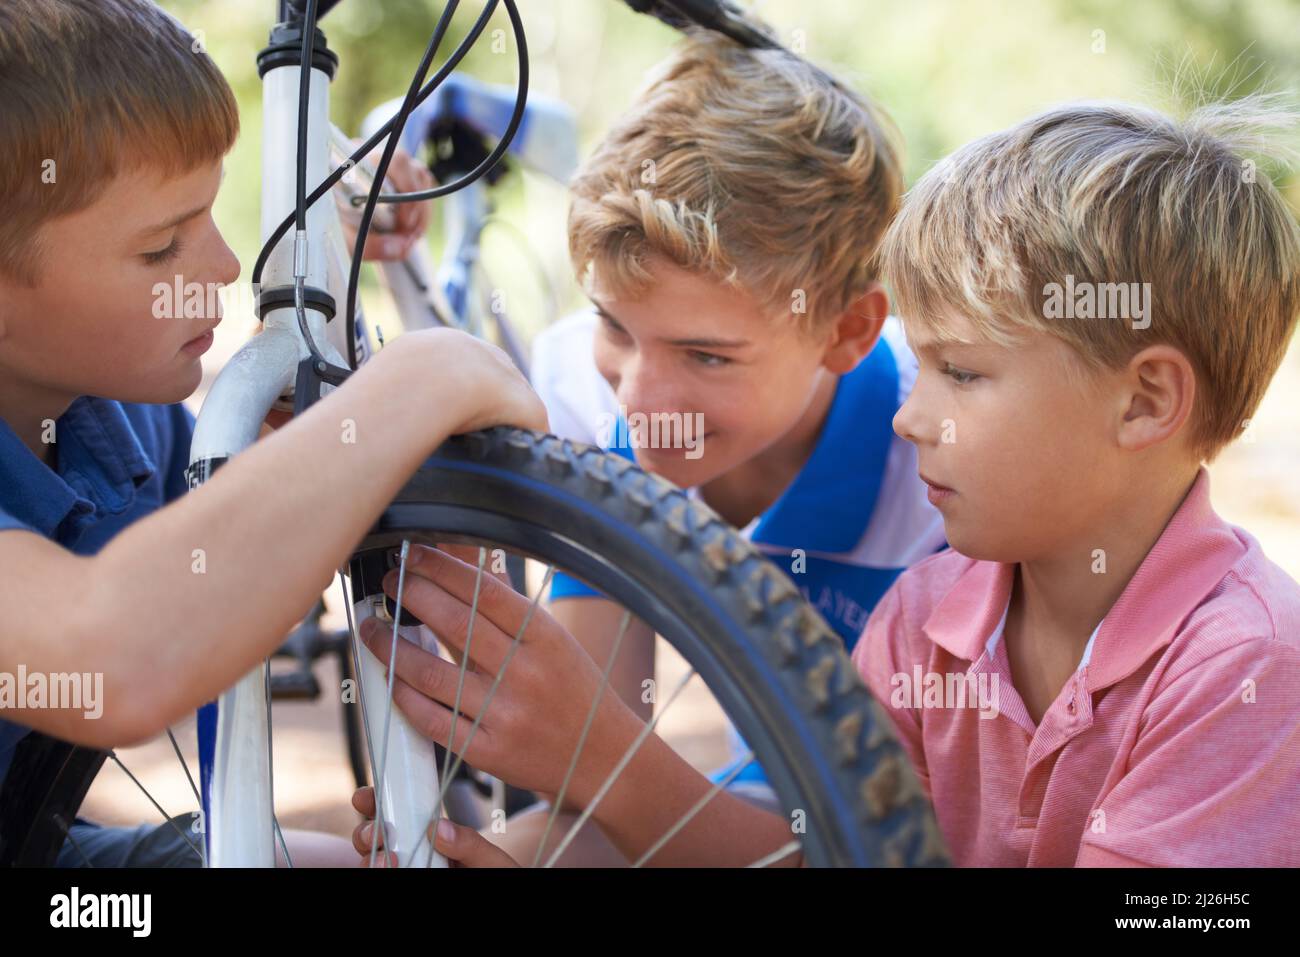 Childhood moments. Happy young boys playing outside with a bicycle. Stock Photo